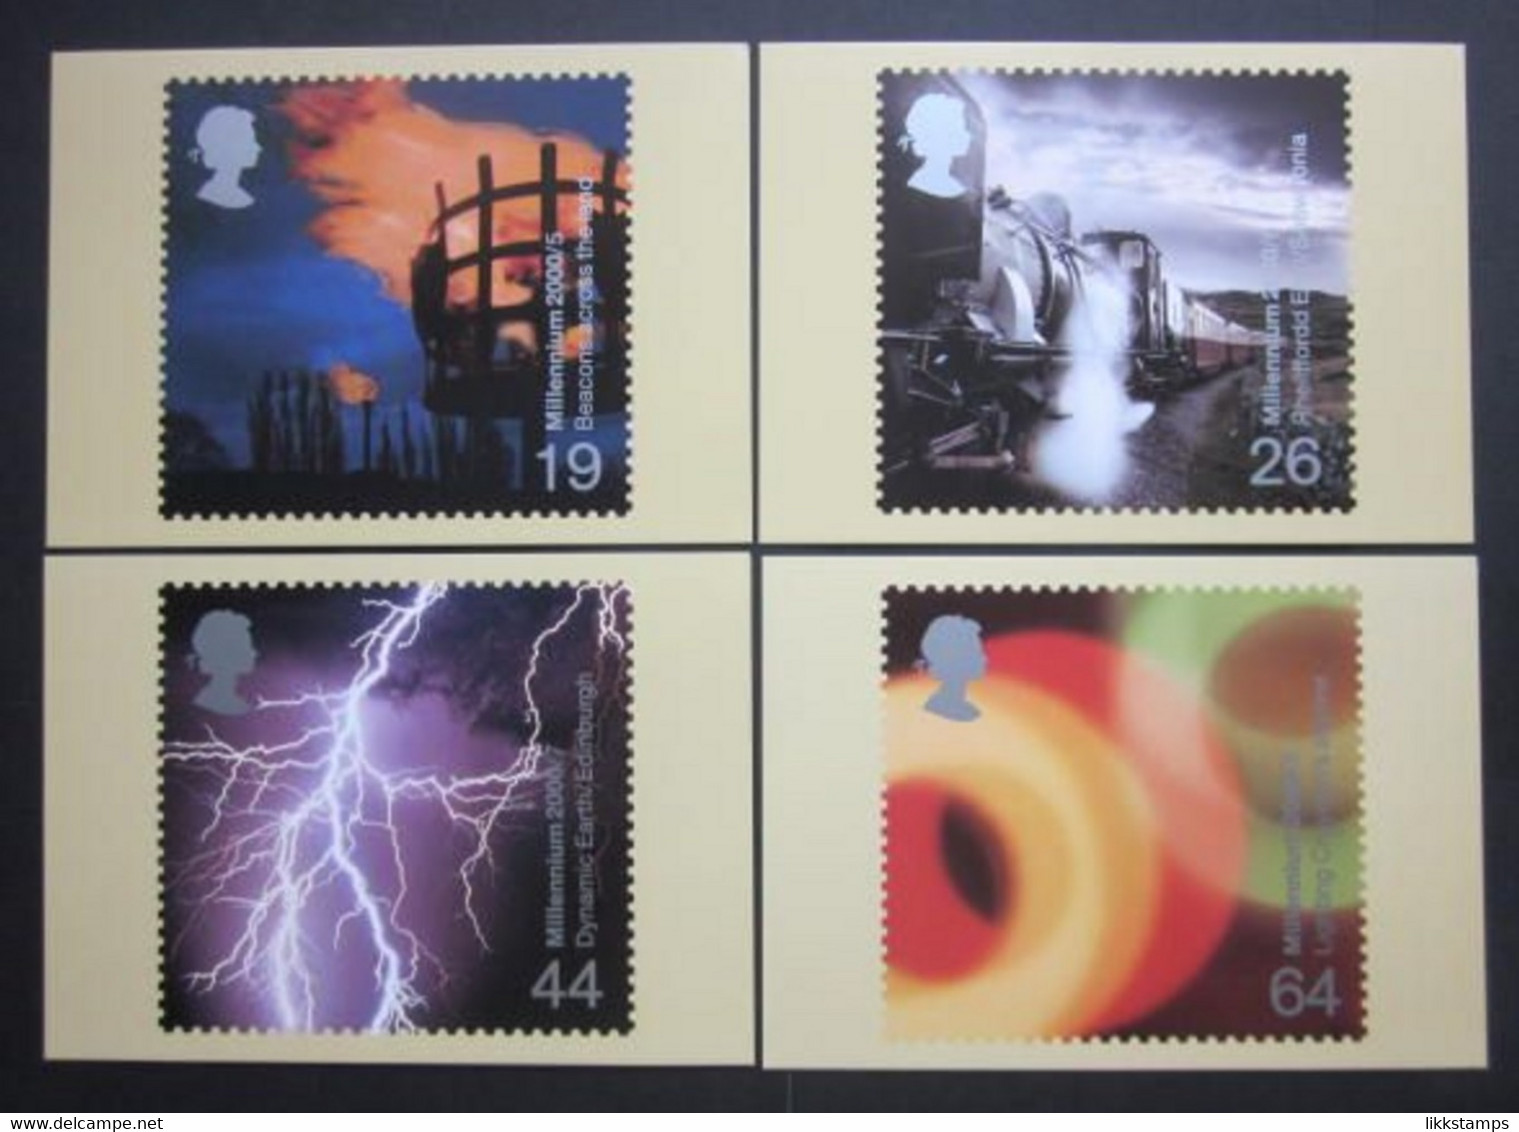 2000 'FIRE AND LIGHT' P.H.Q. CARDS UNUSED, ISSUE No. 216 (B) #00913 - PHQ Karten